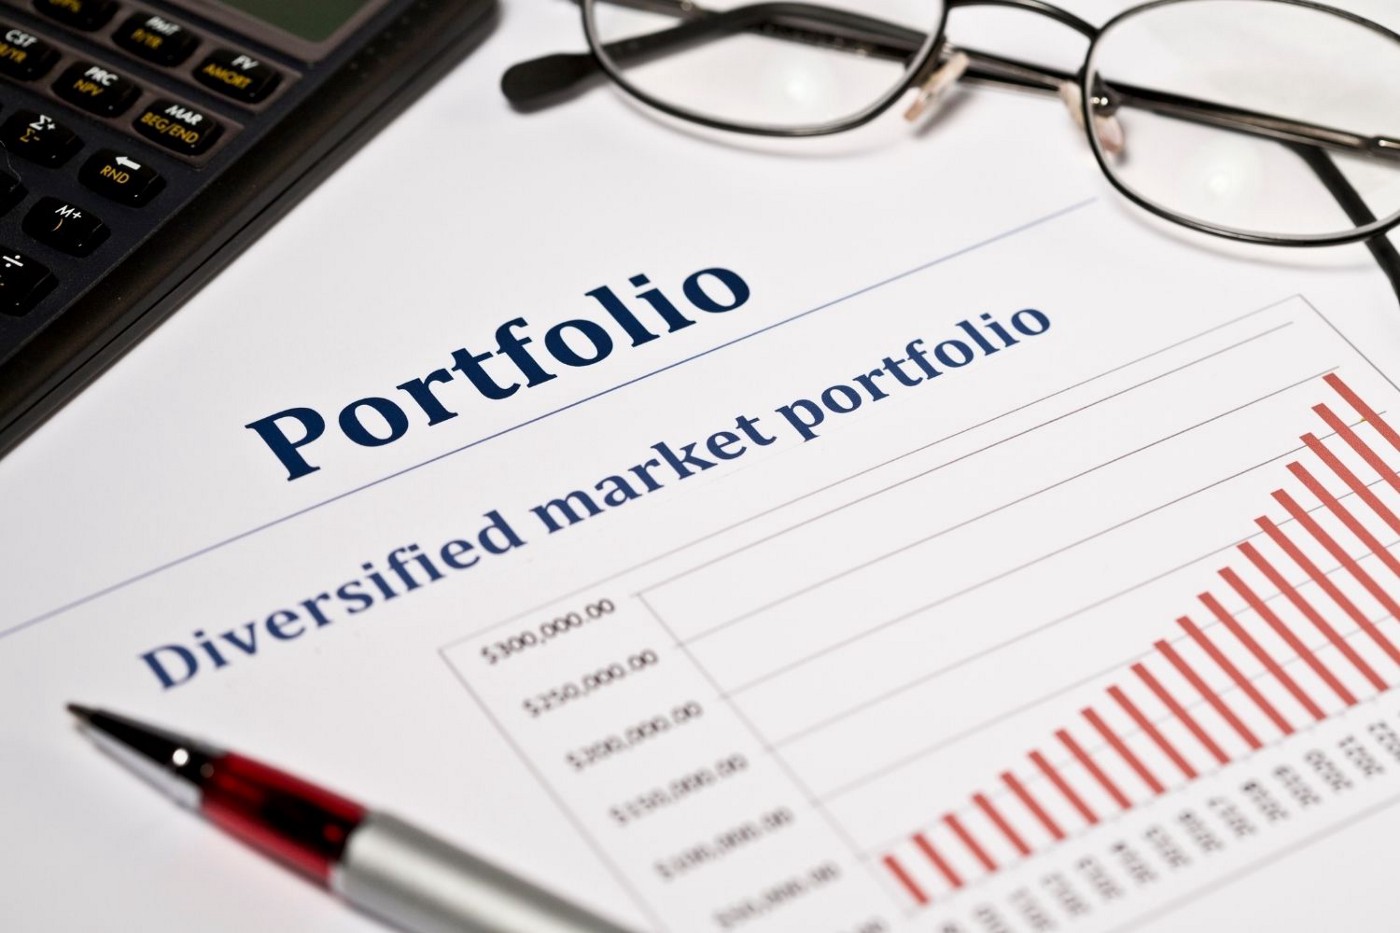 Image of a portfolio with eye glasses and a writing pen on a desk.